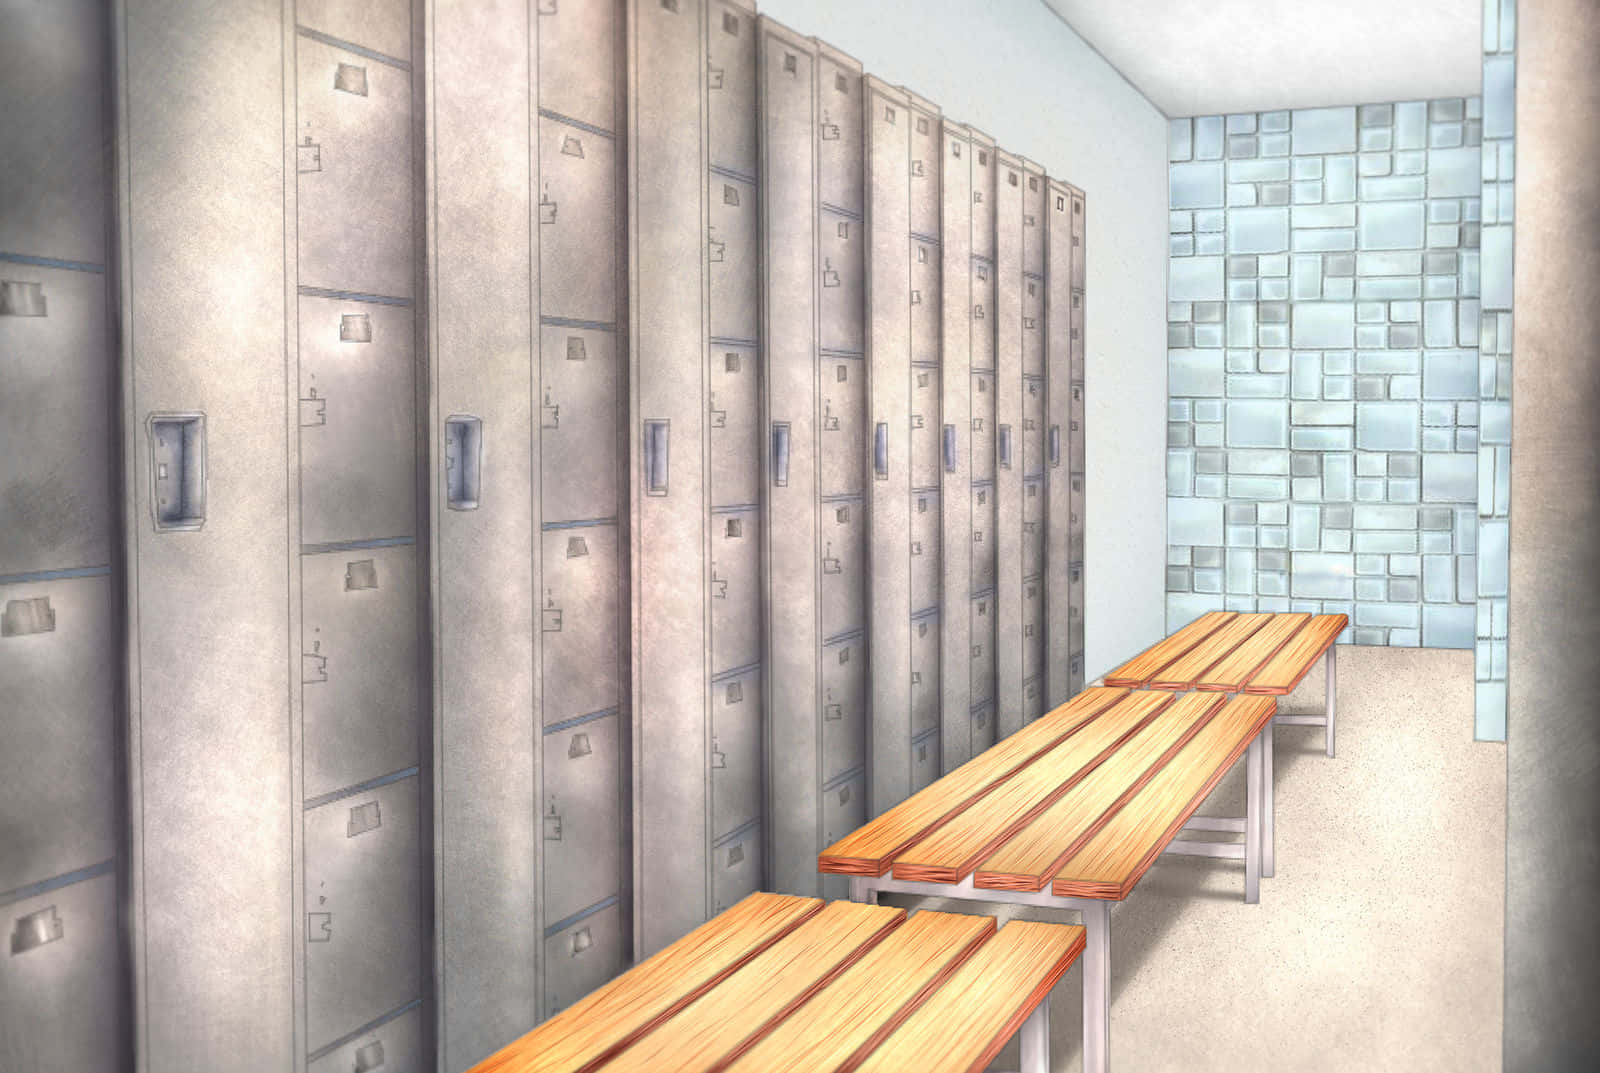 A Locker Room With Benches And Lockers